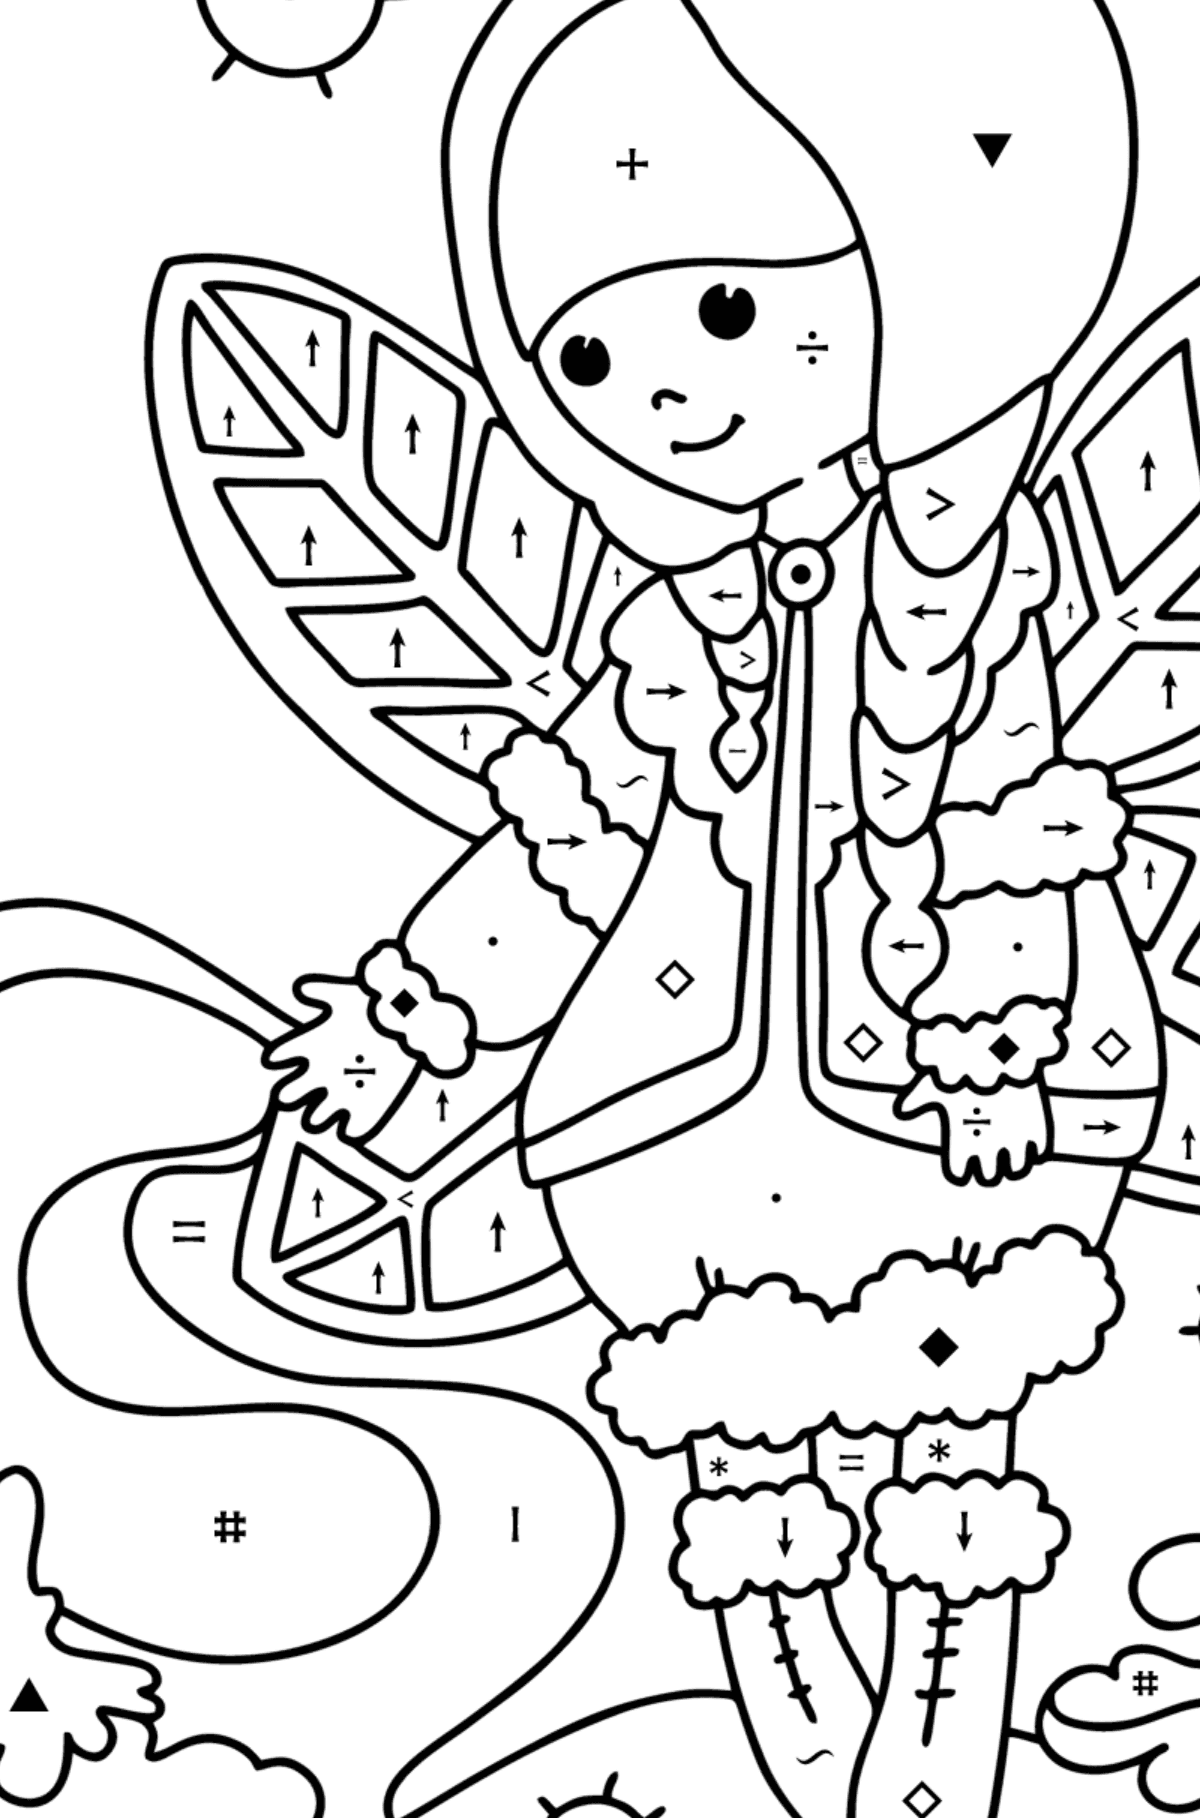 Winter Fairy coloring page - Coloring by Symbols for Kids